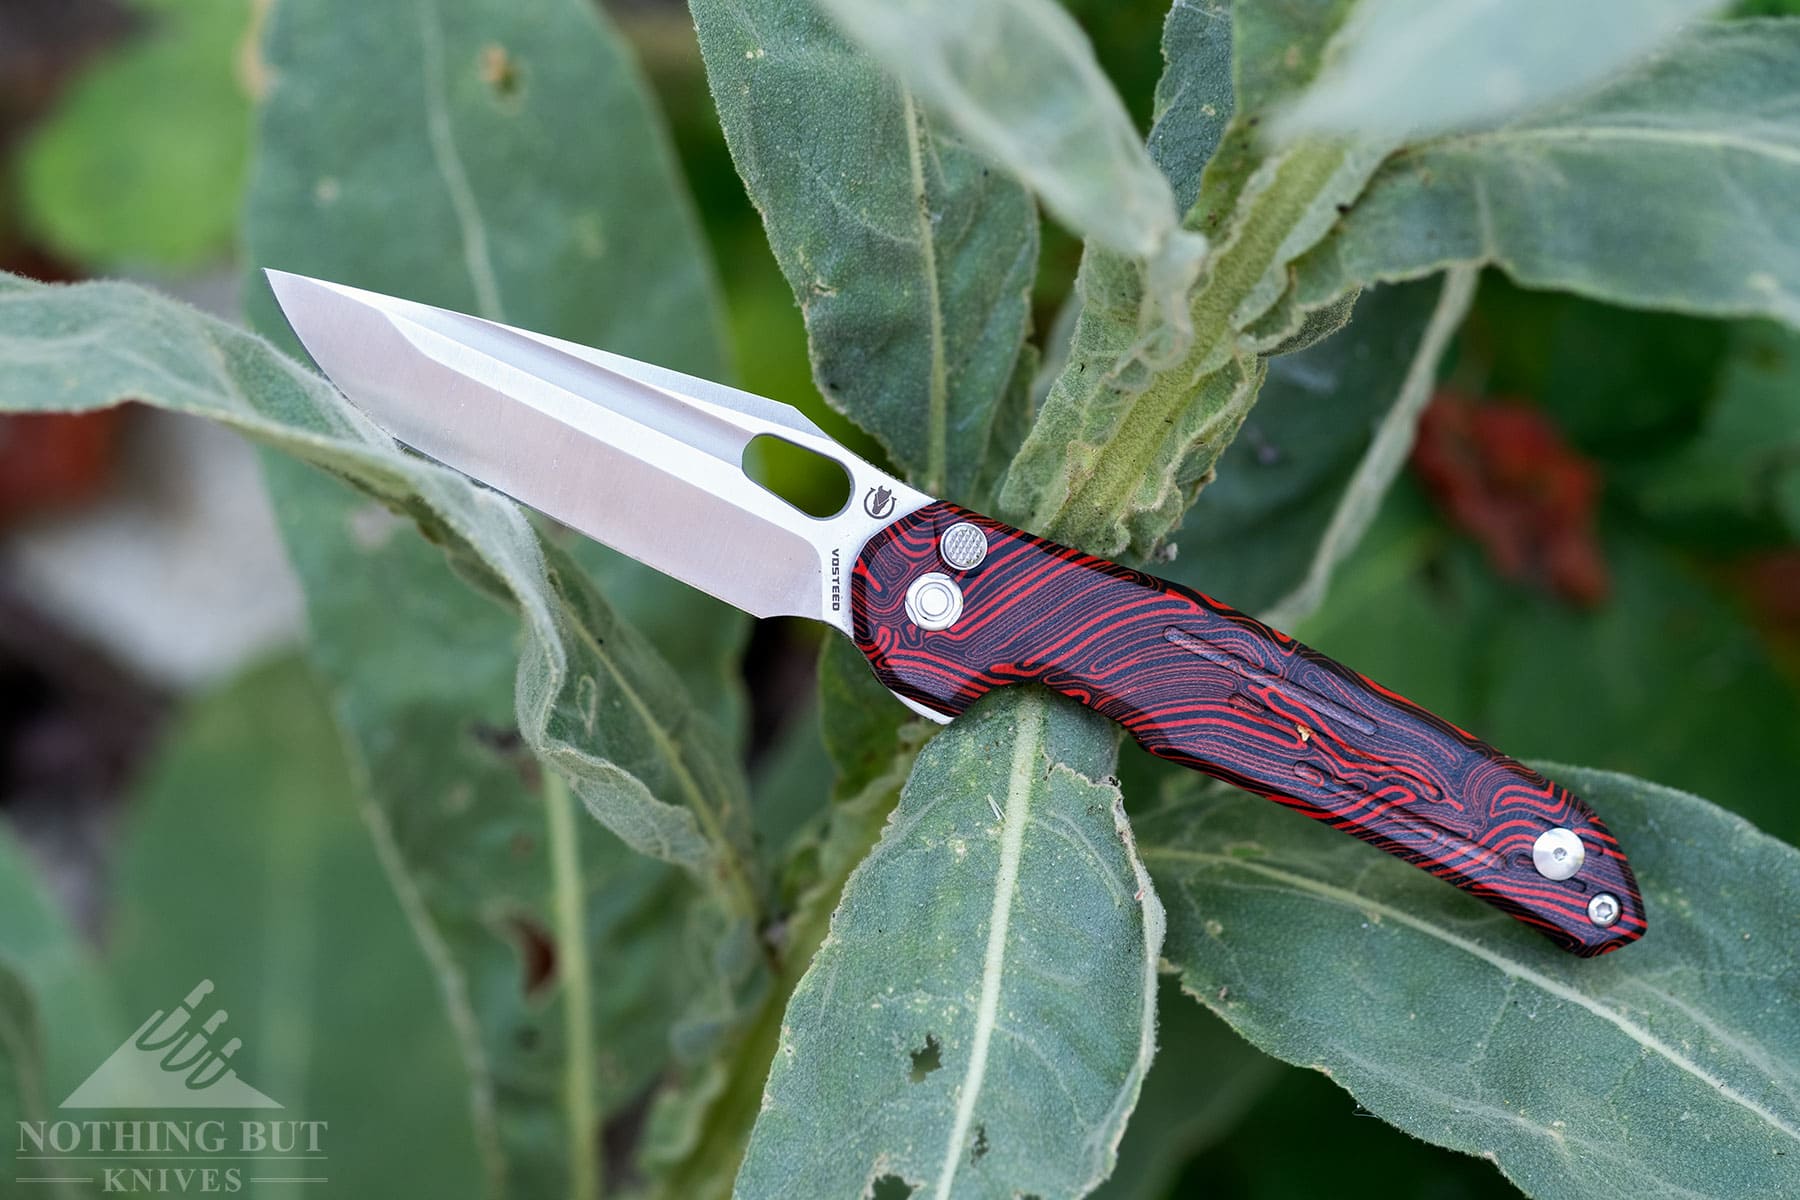 The Vosteed Thunderbird EDC knife in the open position balanced on the leaves of a large plant.